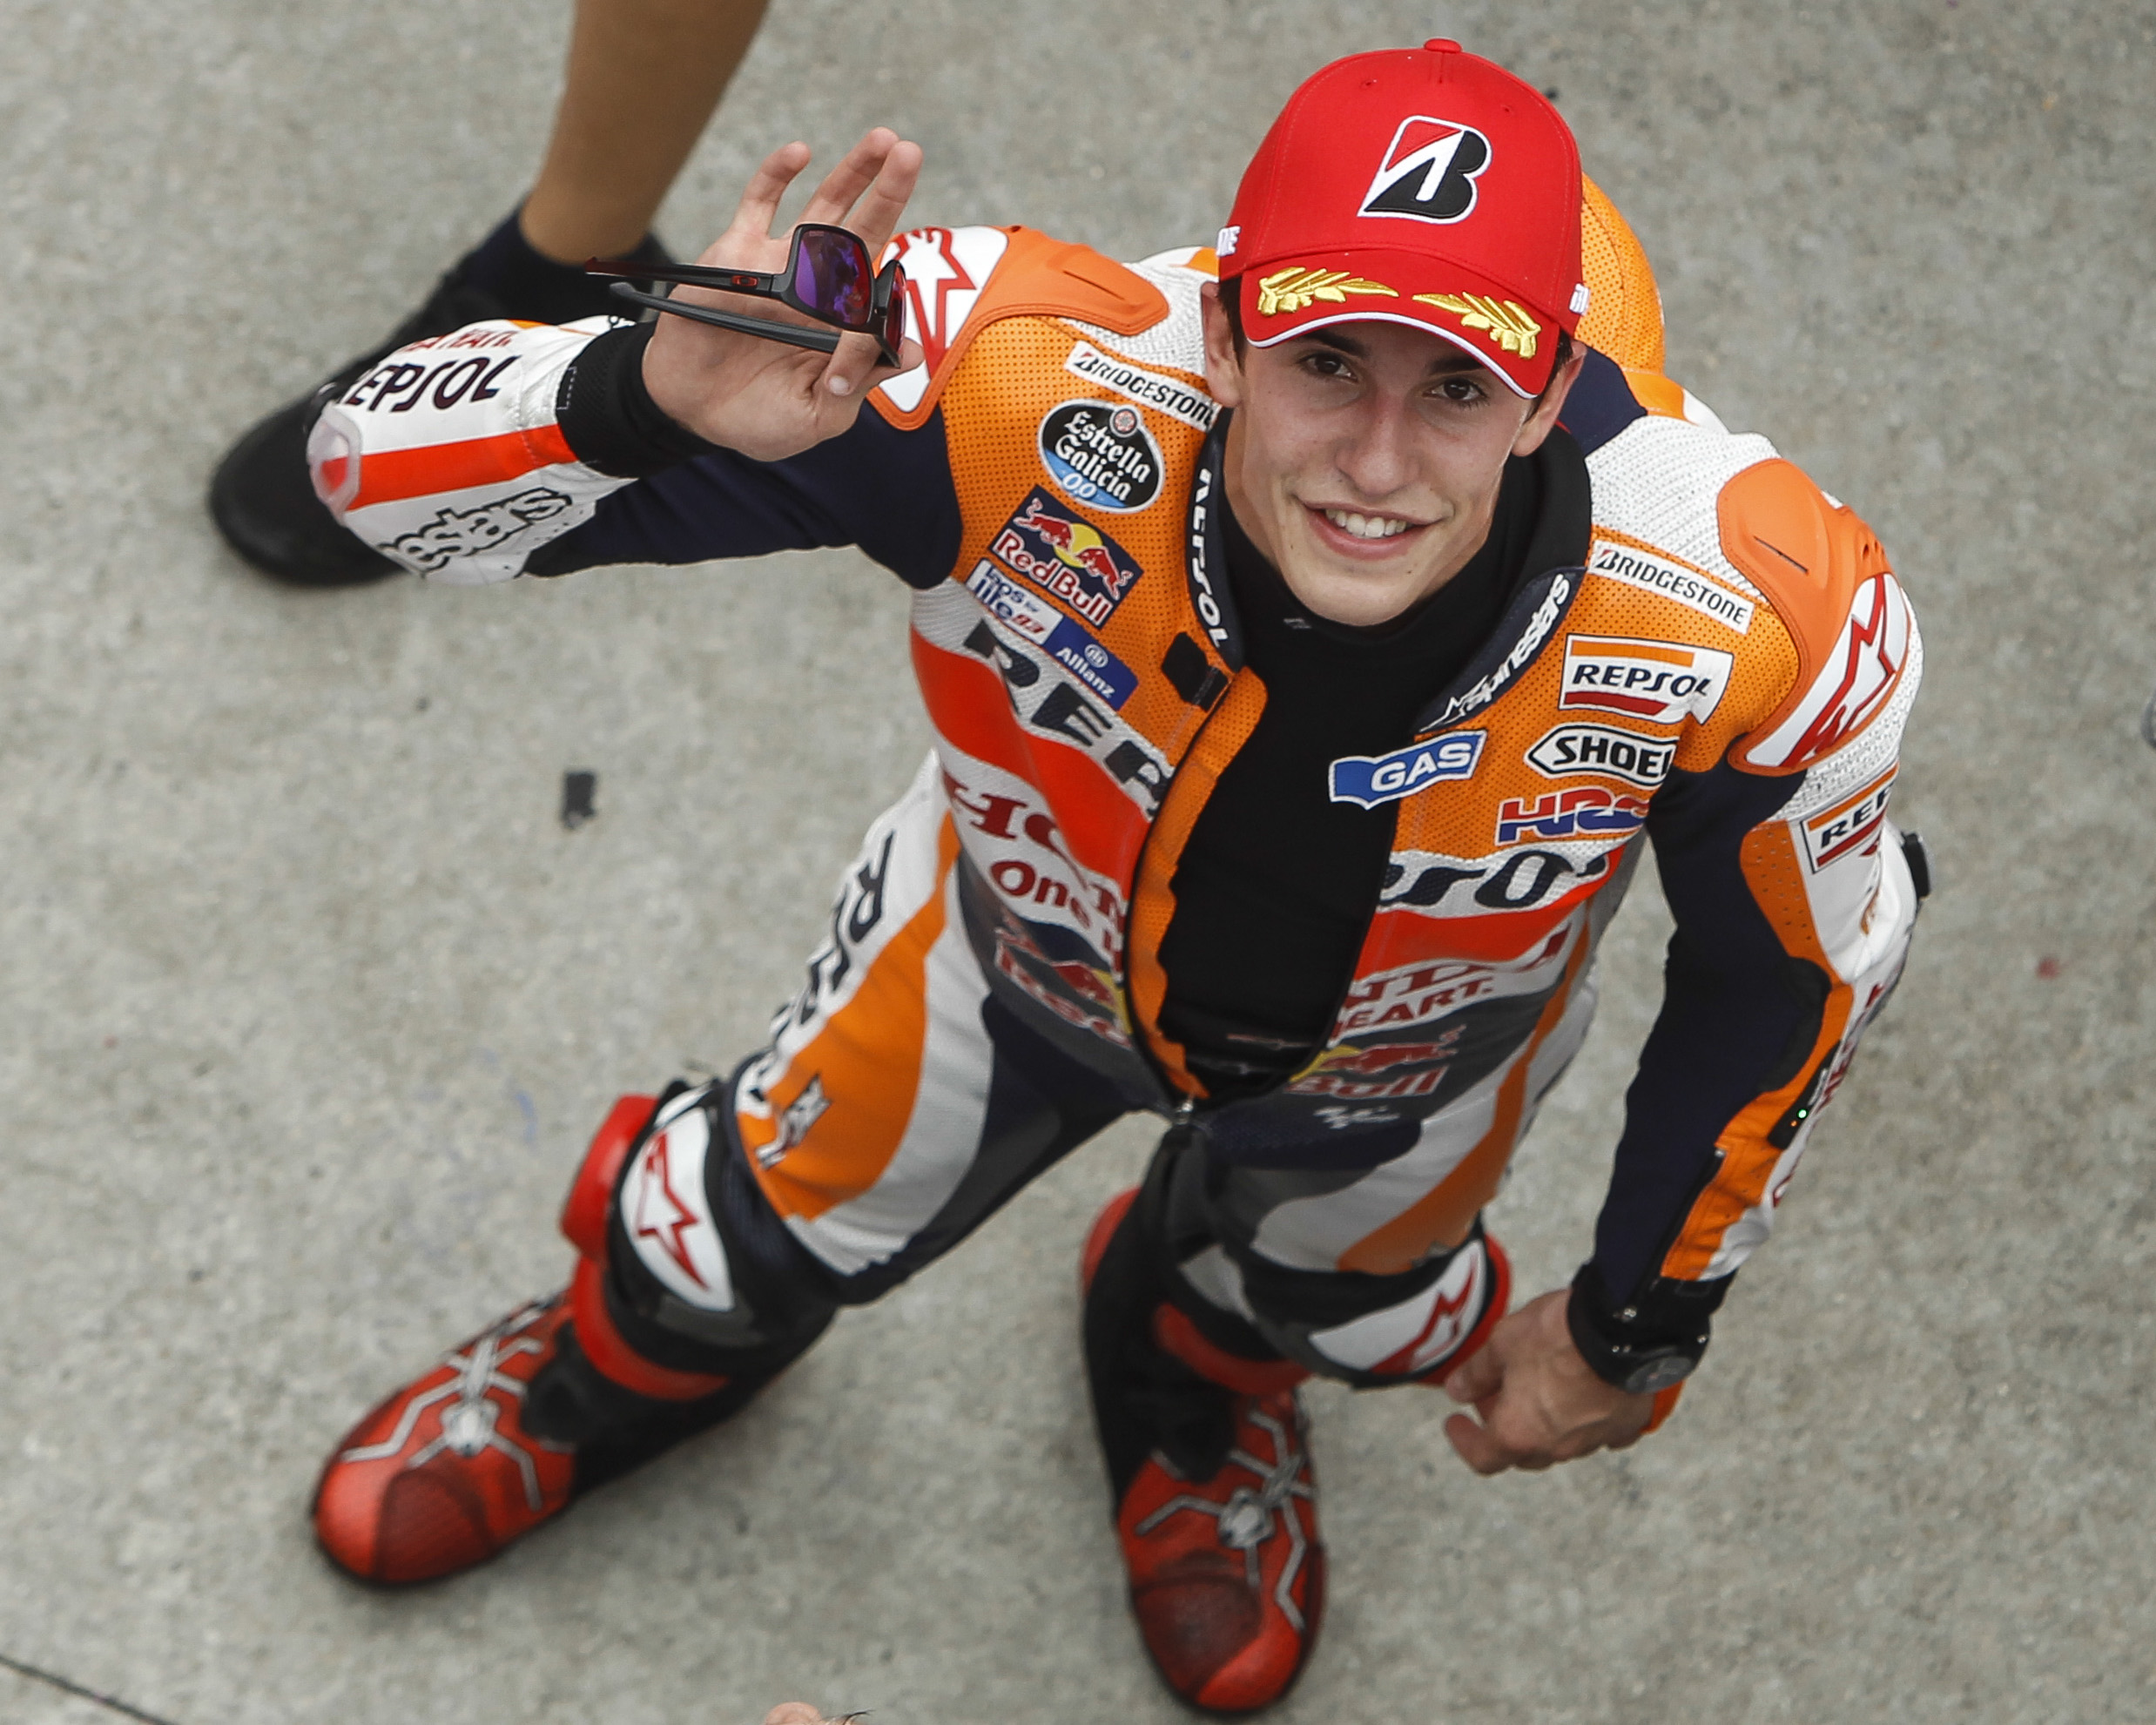 MotoGP rider Marc Marquez of Spain waves at photographers in Sepang, Malaysia. Photo: AP